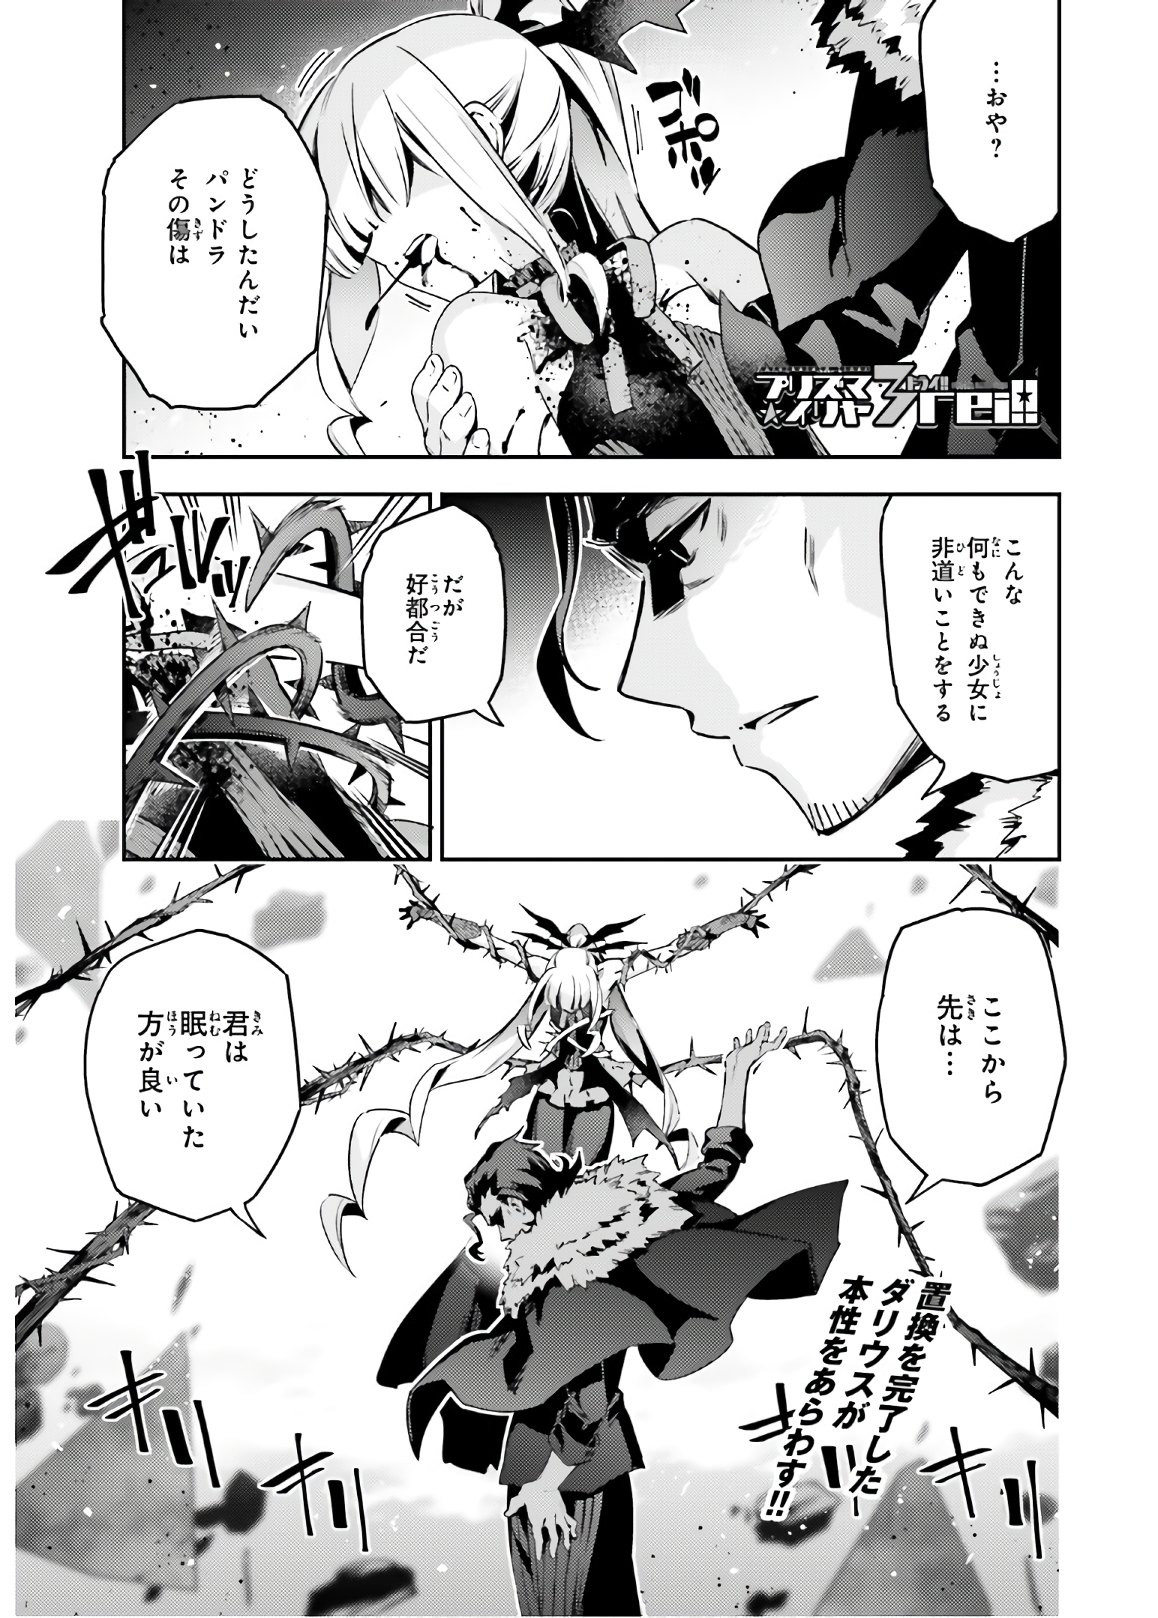 Fate/Kaleid Liner Prisma Illya Drei! - Chapter 58-1 - Page 1